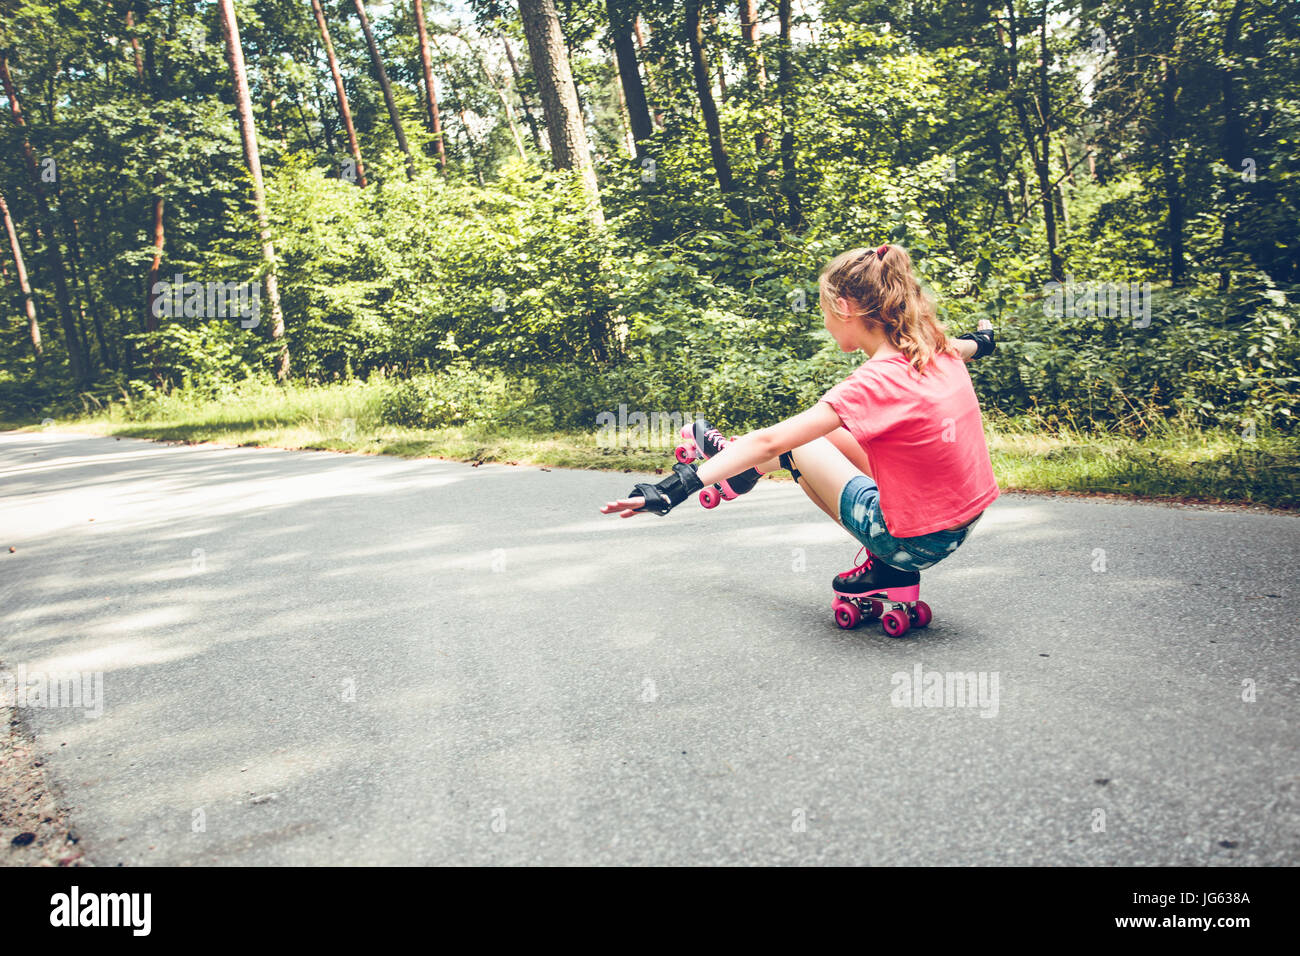 Young girl roller skating down on a forest road on summer day Stock Photo